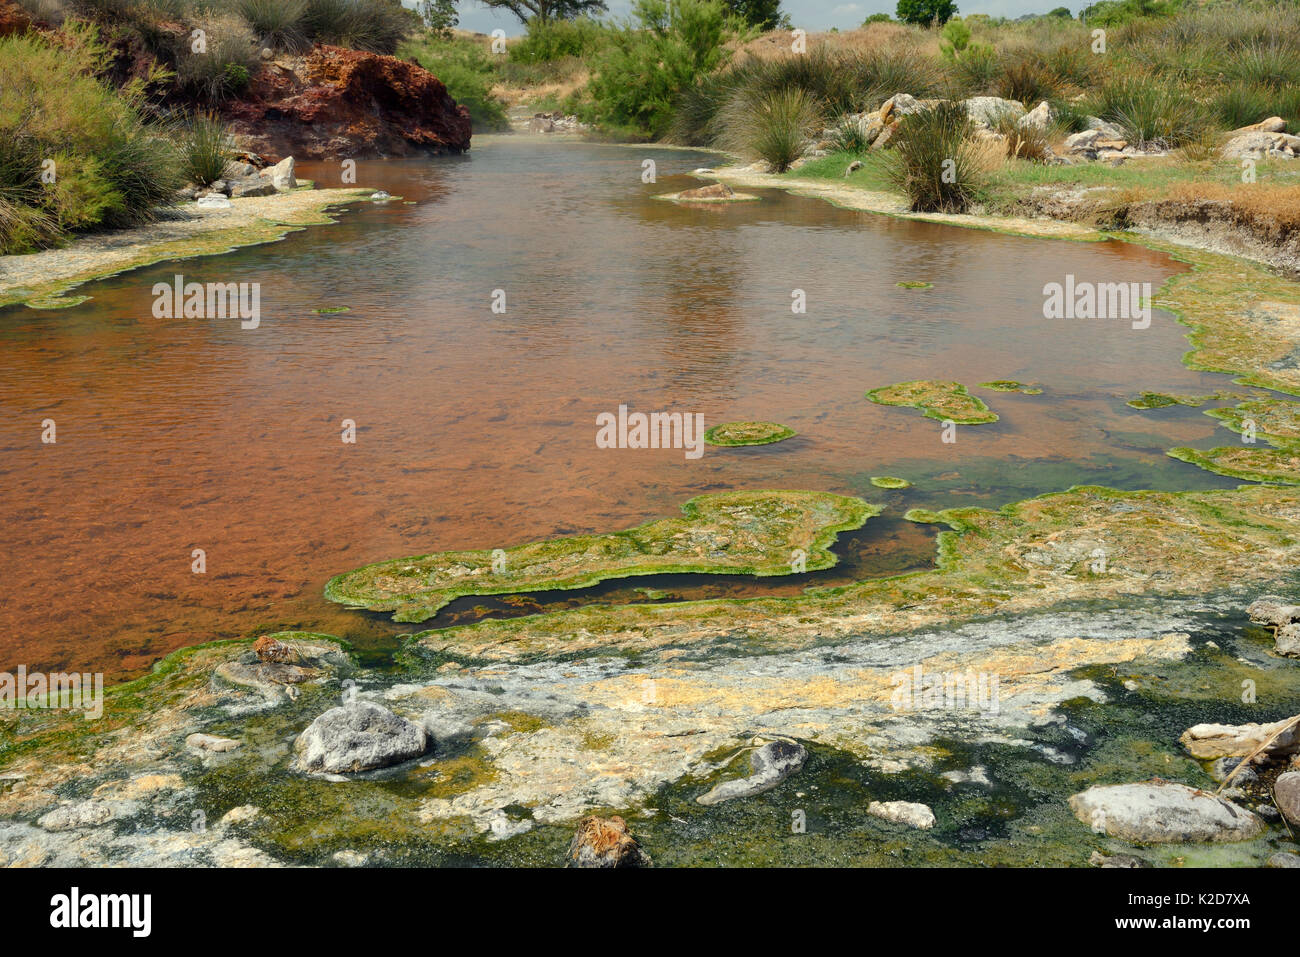 Thermal river, fed with boiling water from hot springs, with colourful growths and scummy crusts of blue-green algae, Lisvori, Polychnitos, Lesbos / Lesvos, Greece, May 2013. Stock Photo